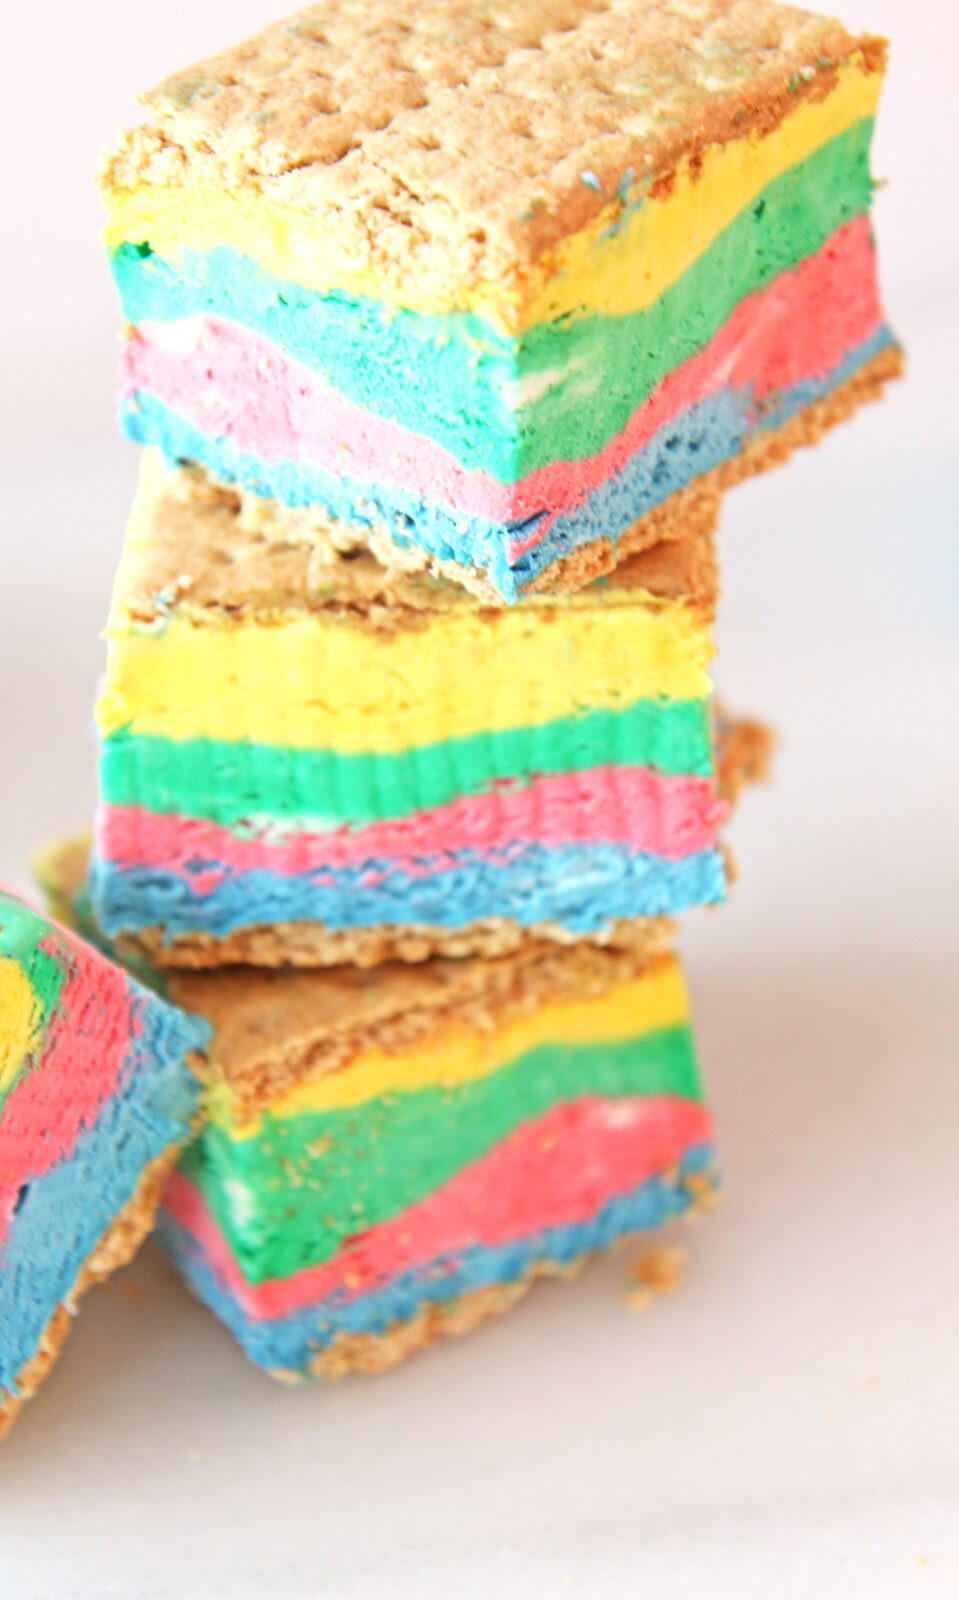 3 Ingredient Rainbow Ice Cream Bar Recipe. Sipmle recipe that uses whipped cream and magic of the rainbow. This is a no bake